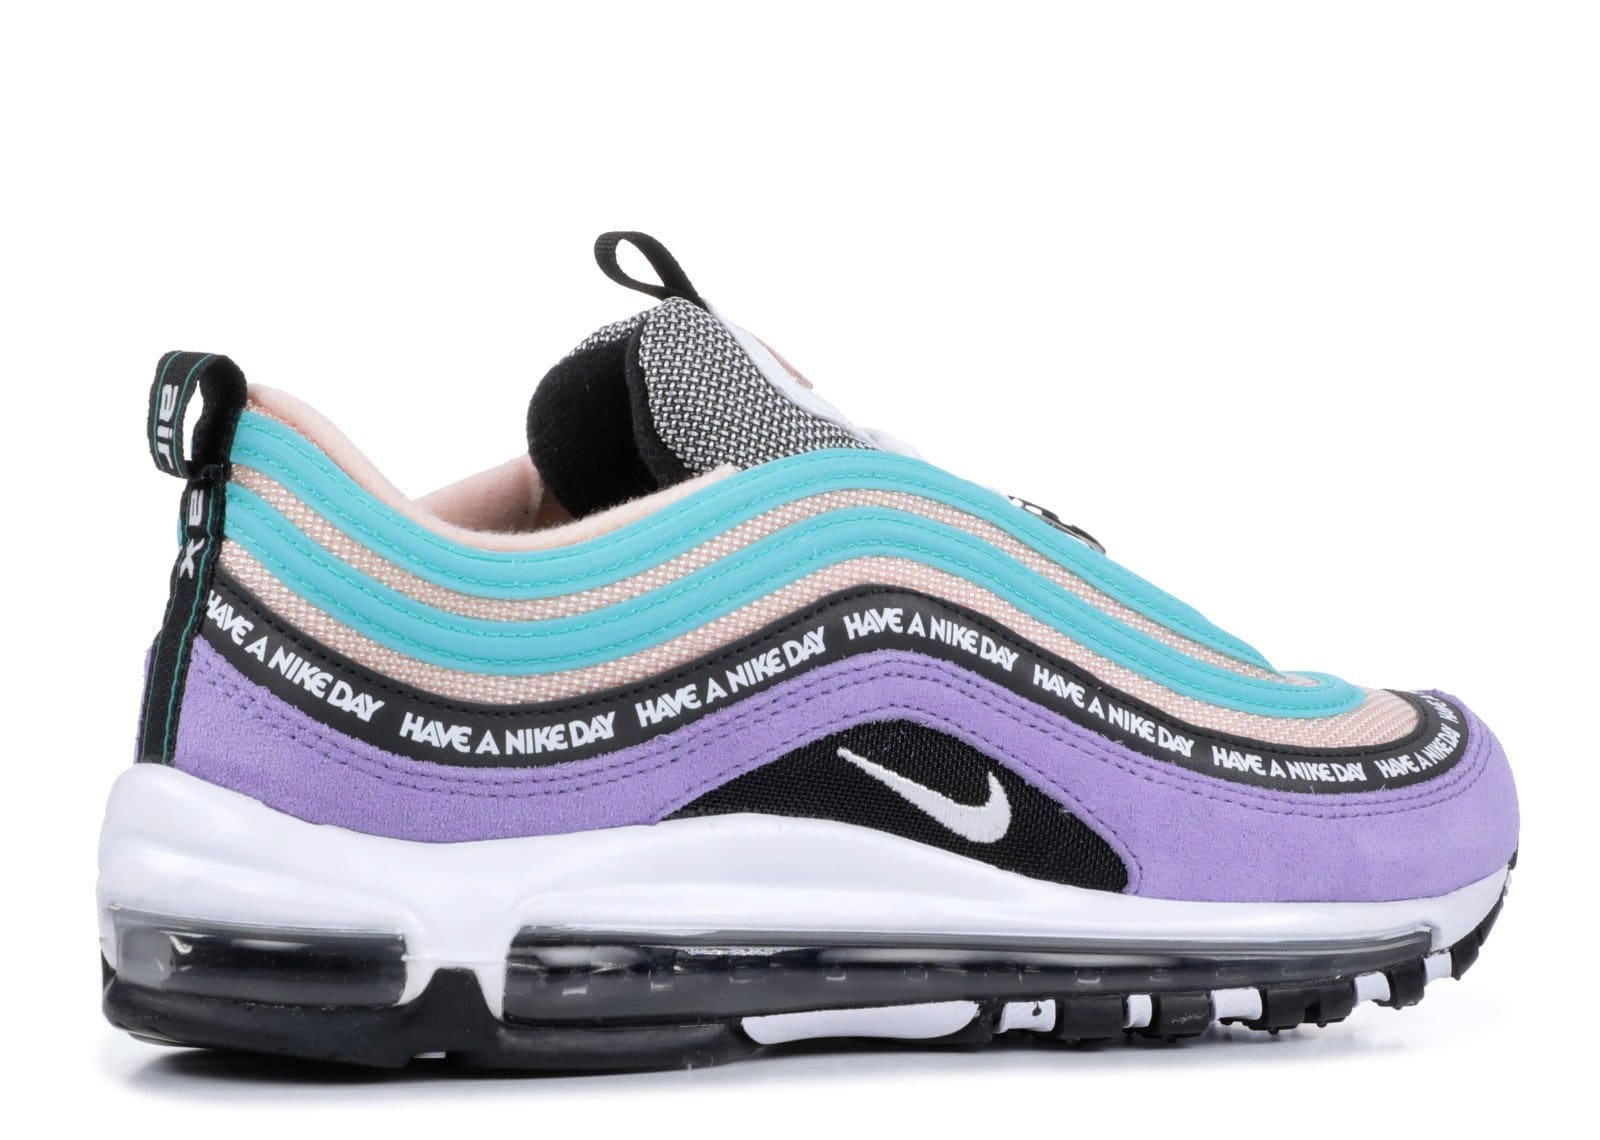 NIKE AIR “HAVE A NIKE DAY” –